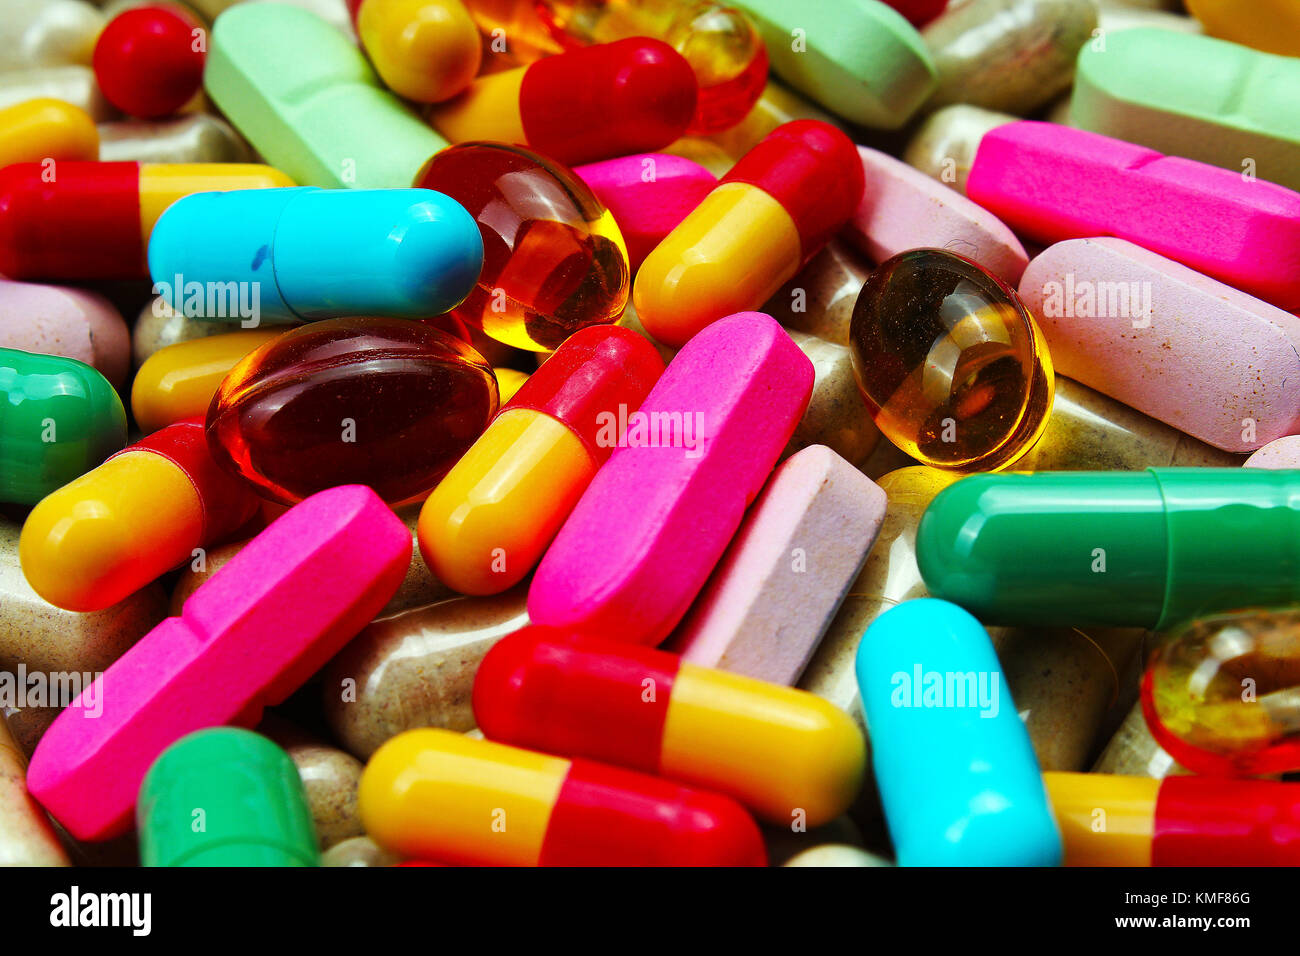 Medical or vitamin pills. Colorful medicine pills as texture. Pill pattern background. Stock Photo